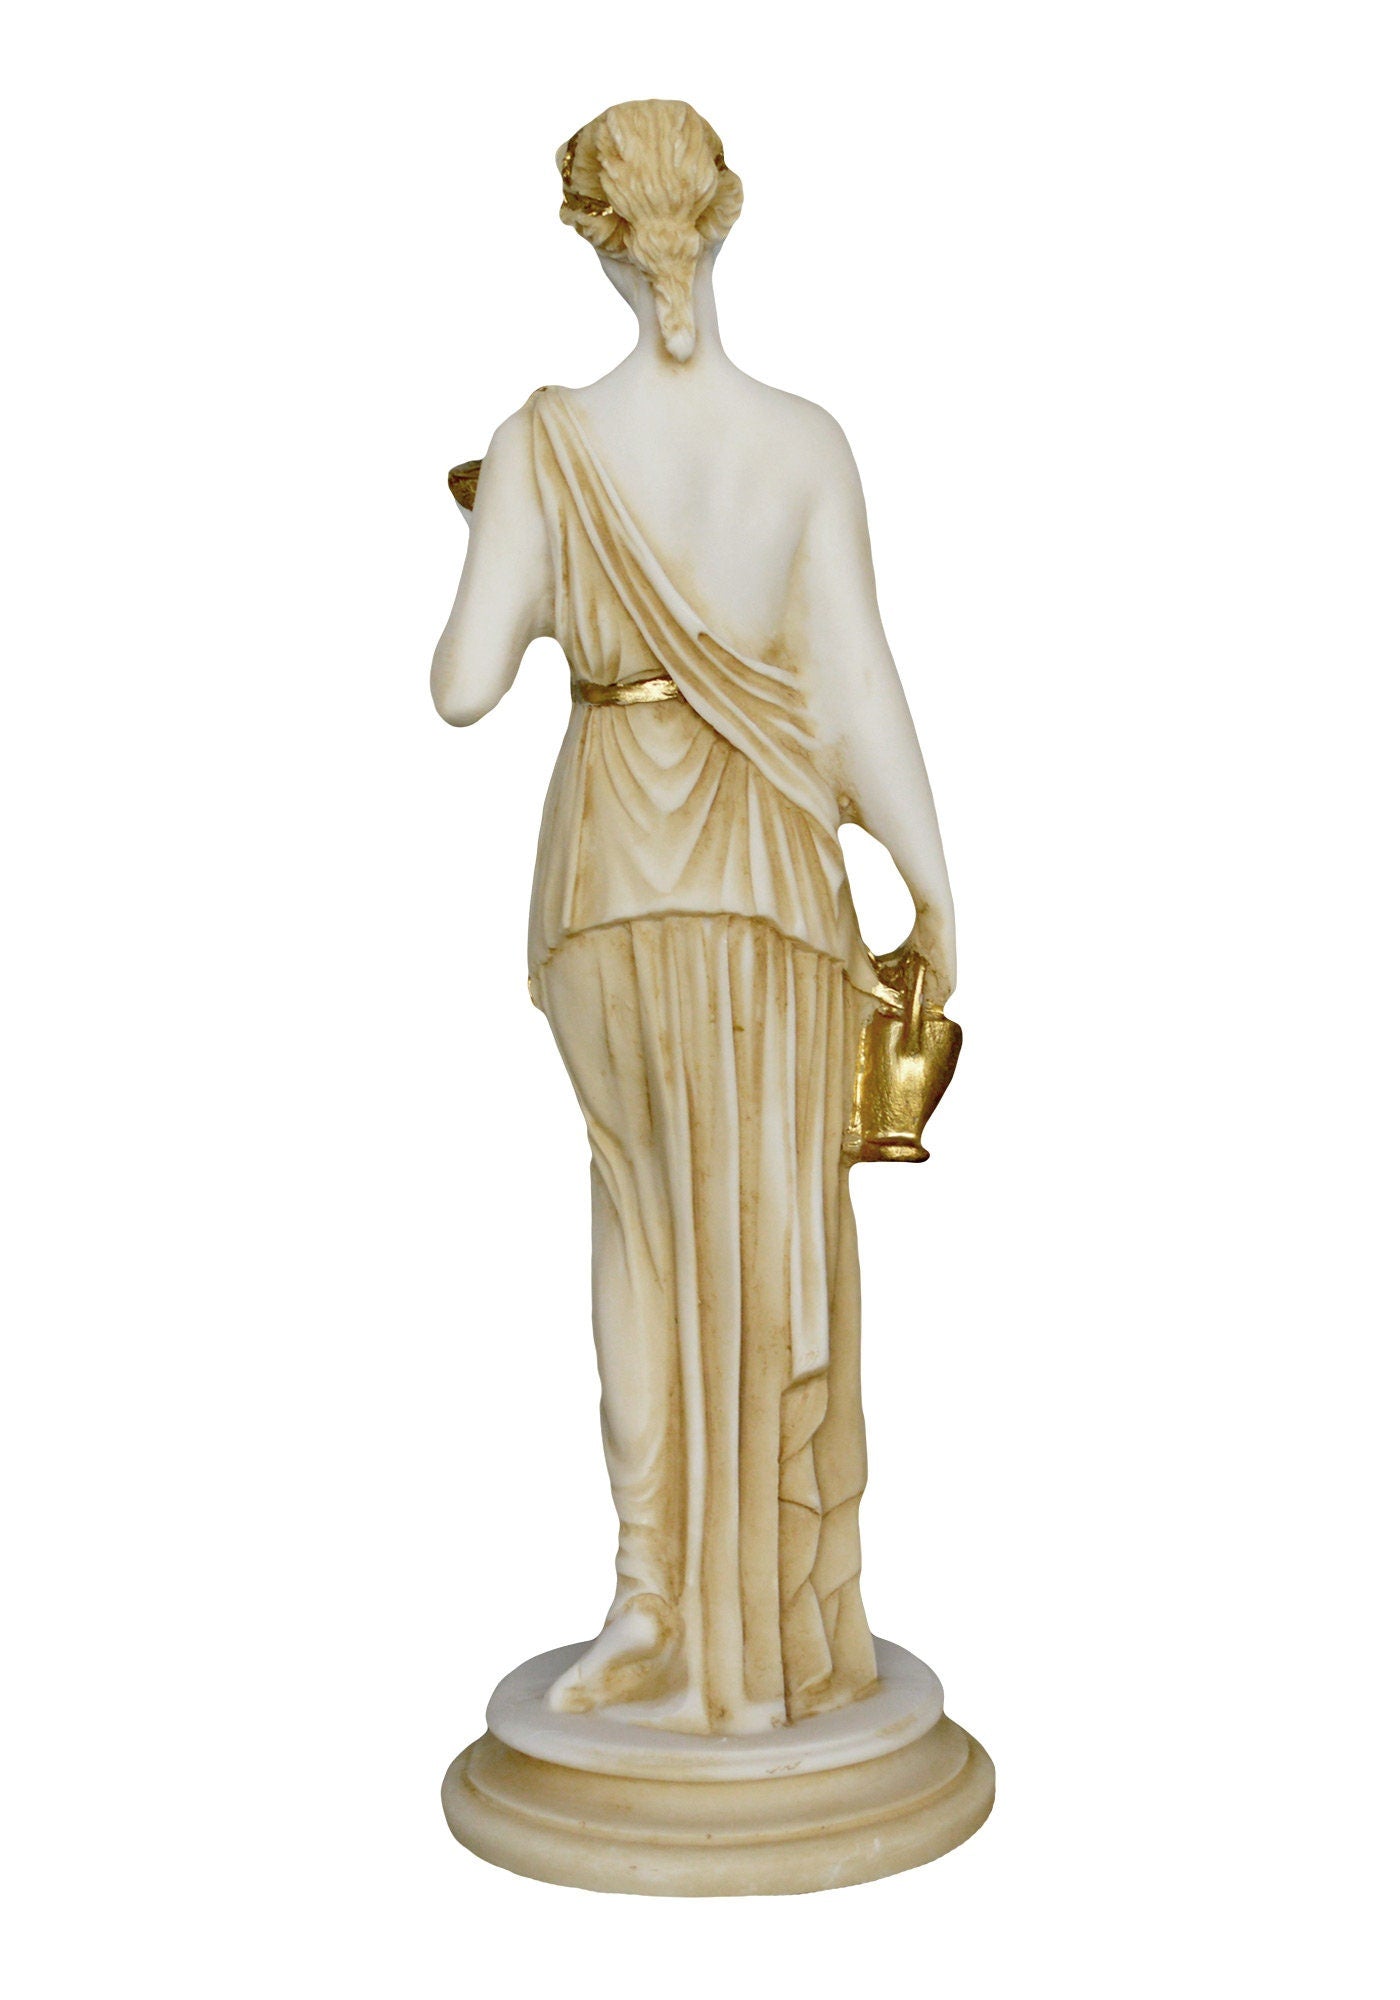 Hebe Juventas - Greek Roman Goddess of Youth or the Prime of Life - Cupbearer of the Gods - Nectar and Ambrosia - Aged Alabaster Statue